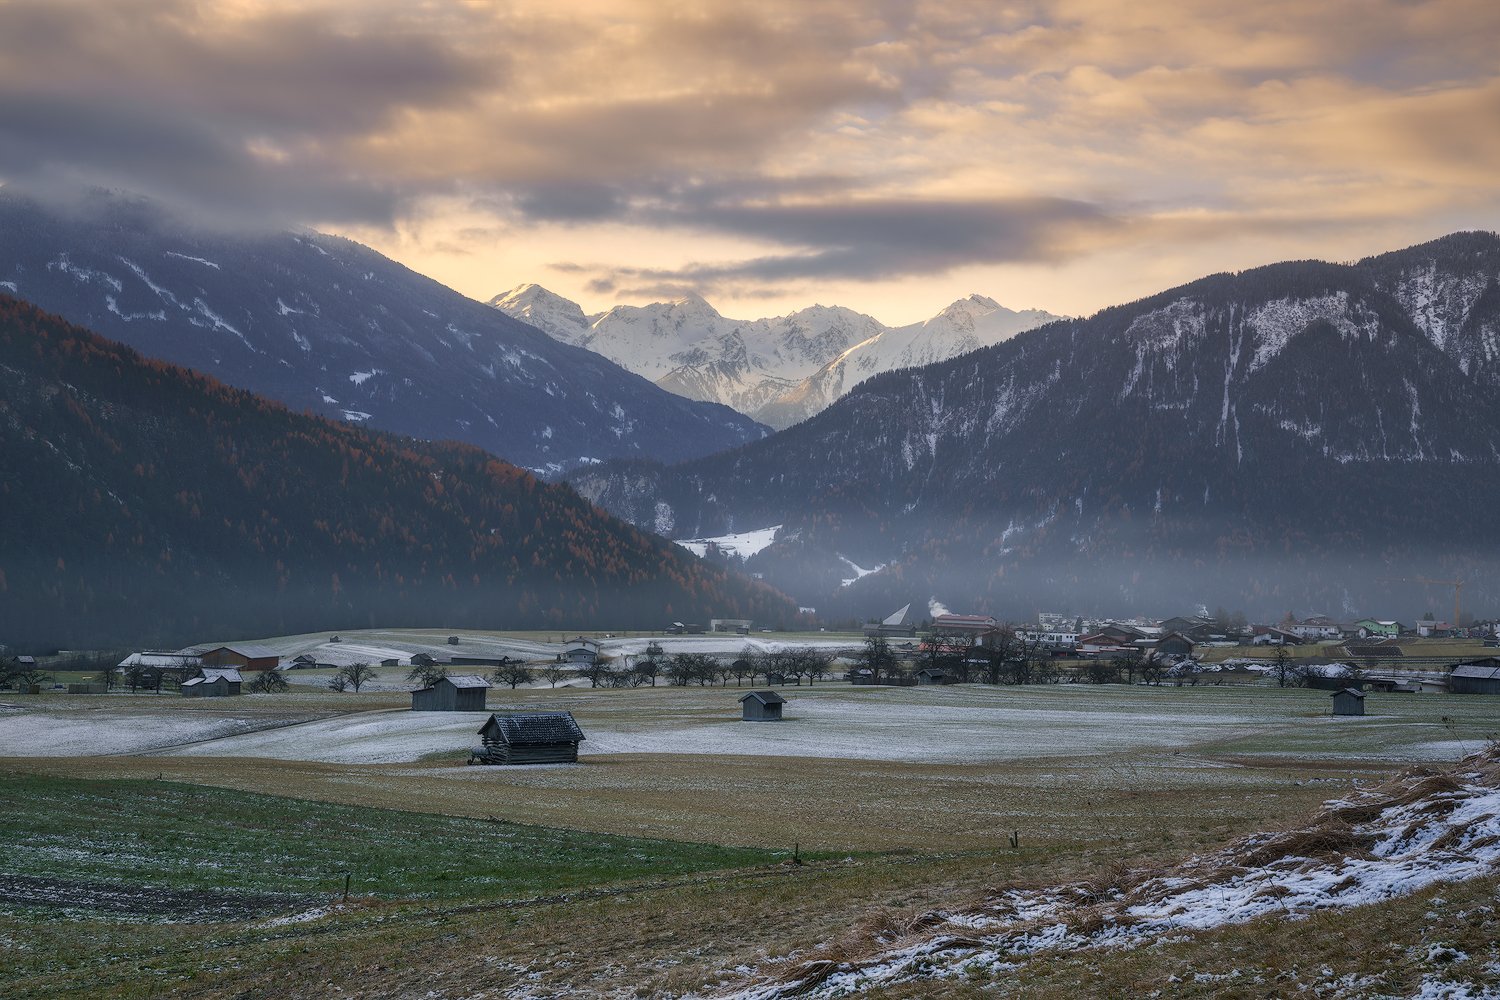 acres, agriculture, alps, austria, austrian alps, barns, forest, fruit trees, gurgltal, hauses, hey barns, hills, huts, imst, larch trees, larches, meadows, morning, morning glow, mountains, outdoors, peaks, snow, tarrenz, tyrol, valley, village, winter, Ludwig Riml